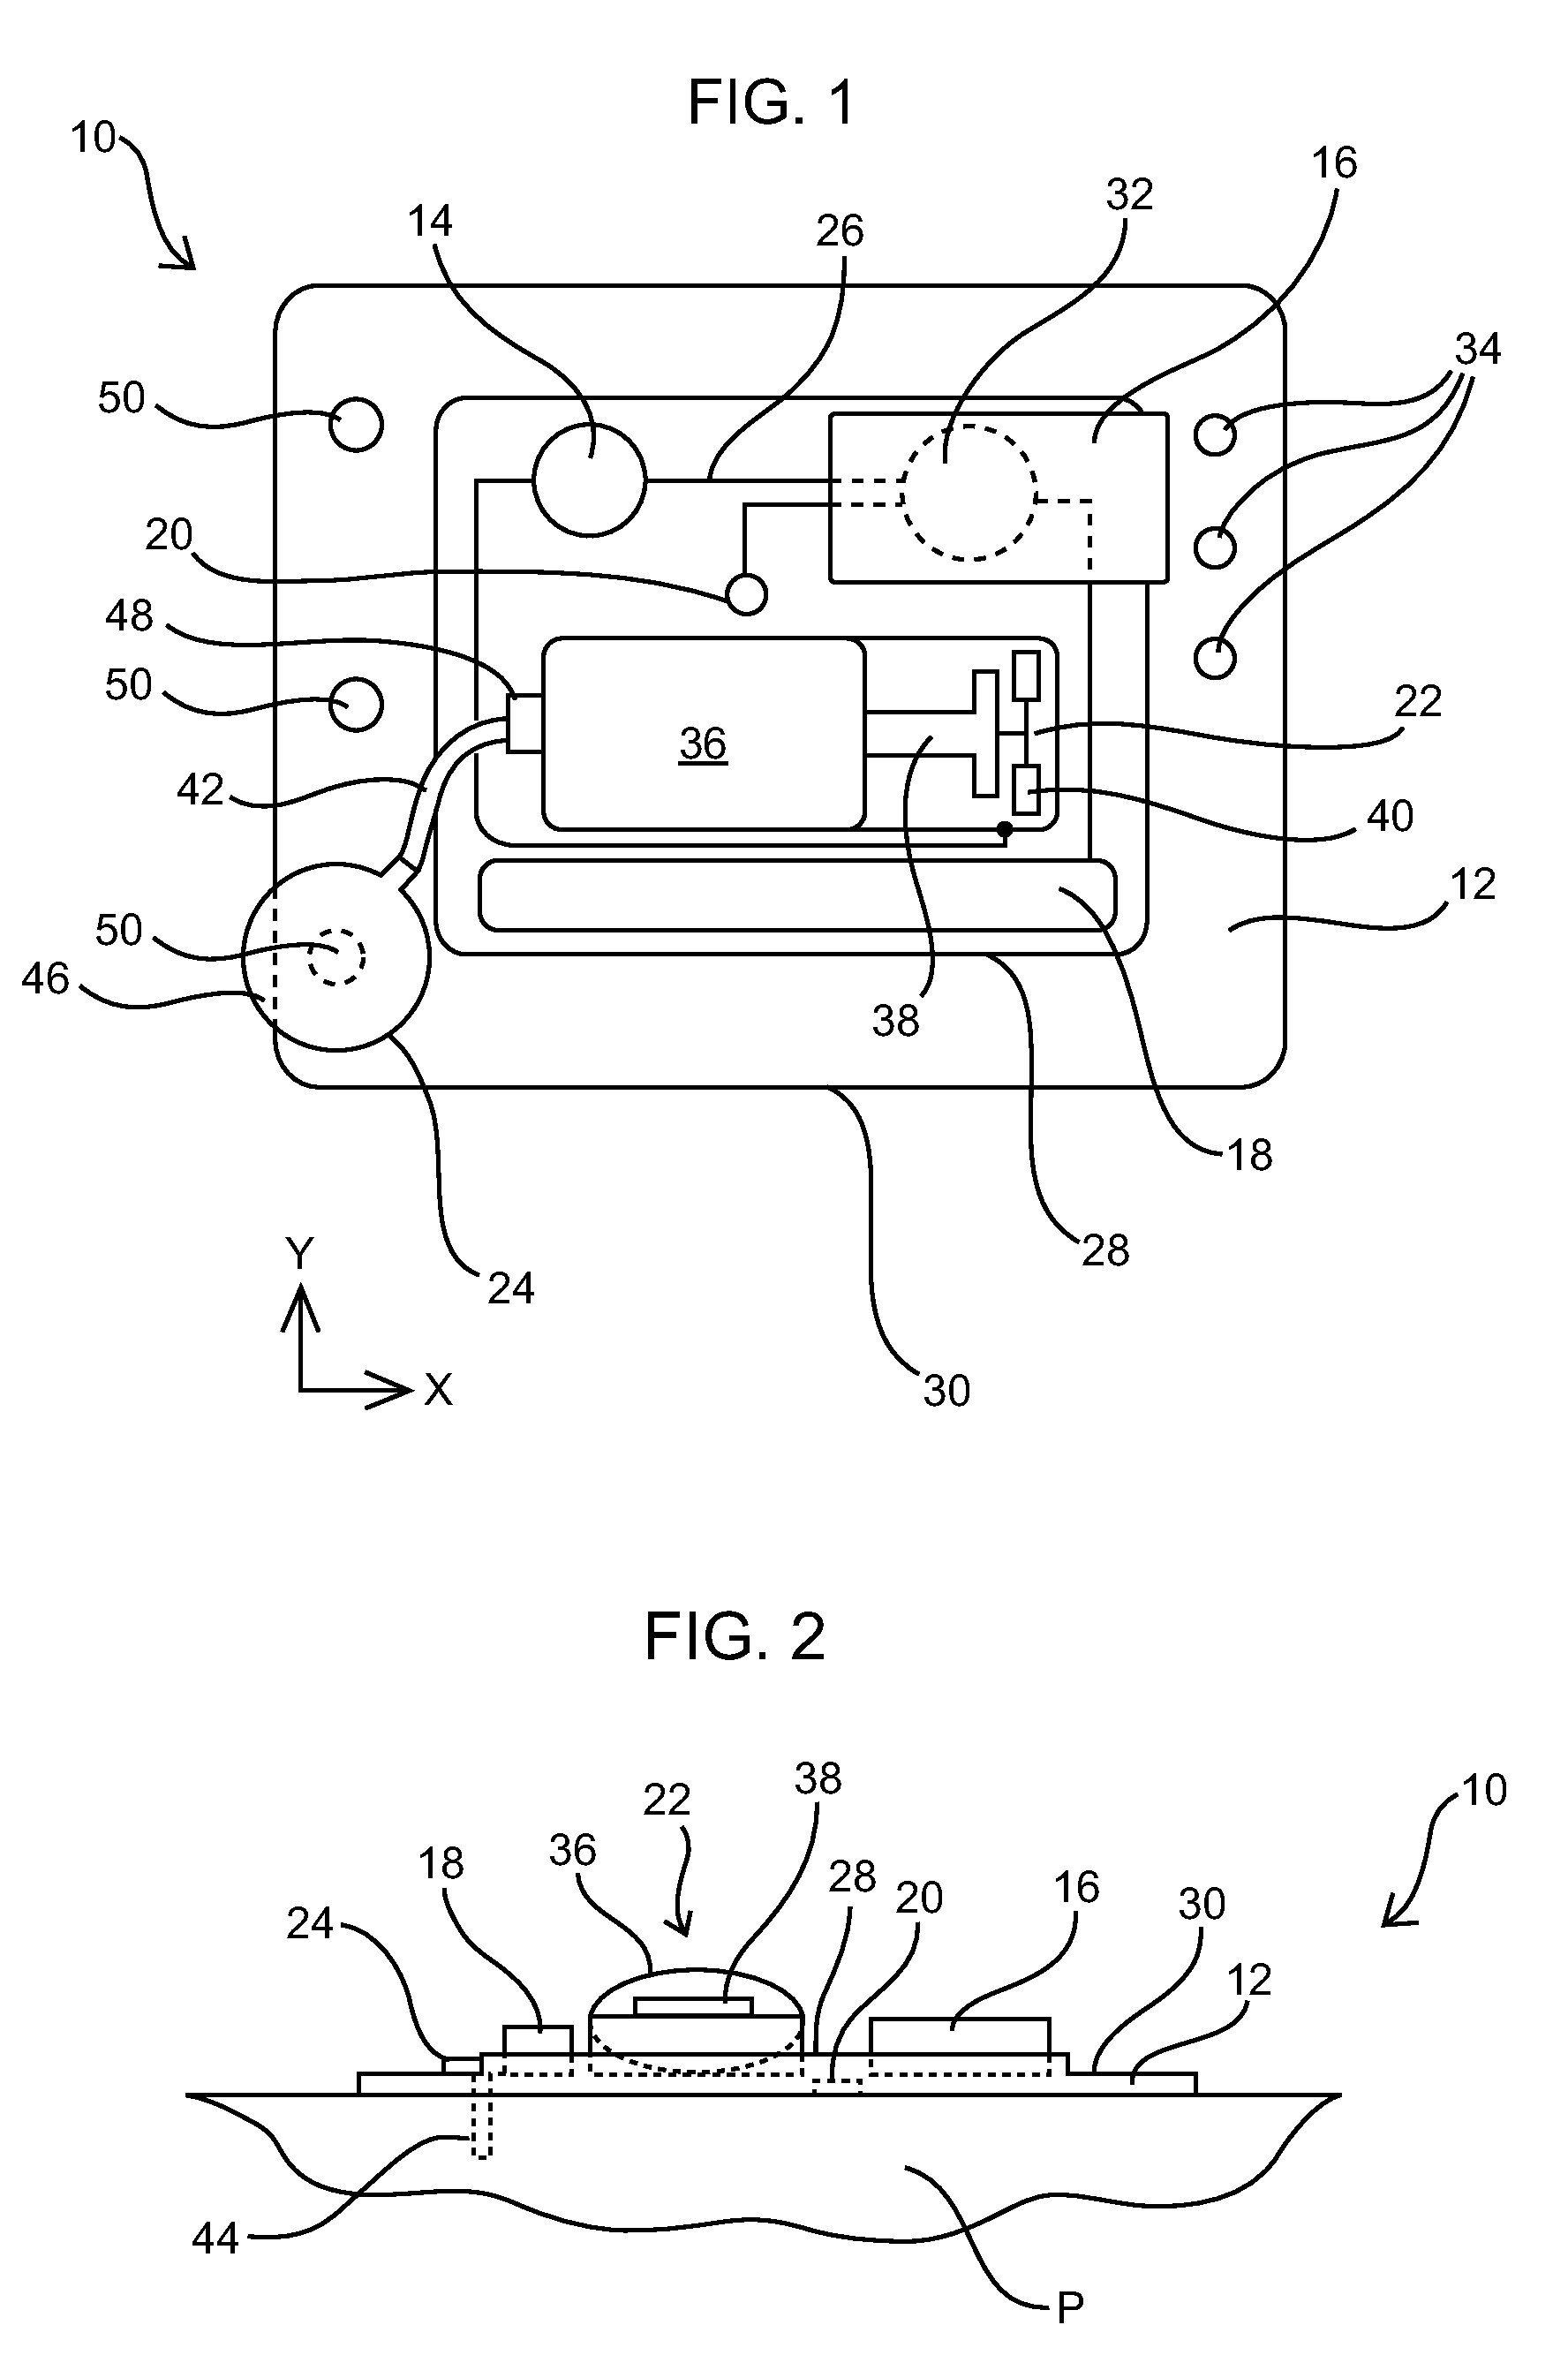 Flexible Patch for Fluid Delivery and Monitoring Body Analytes